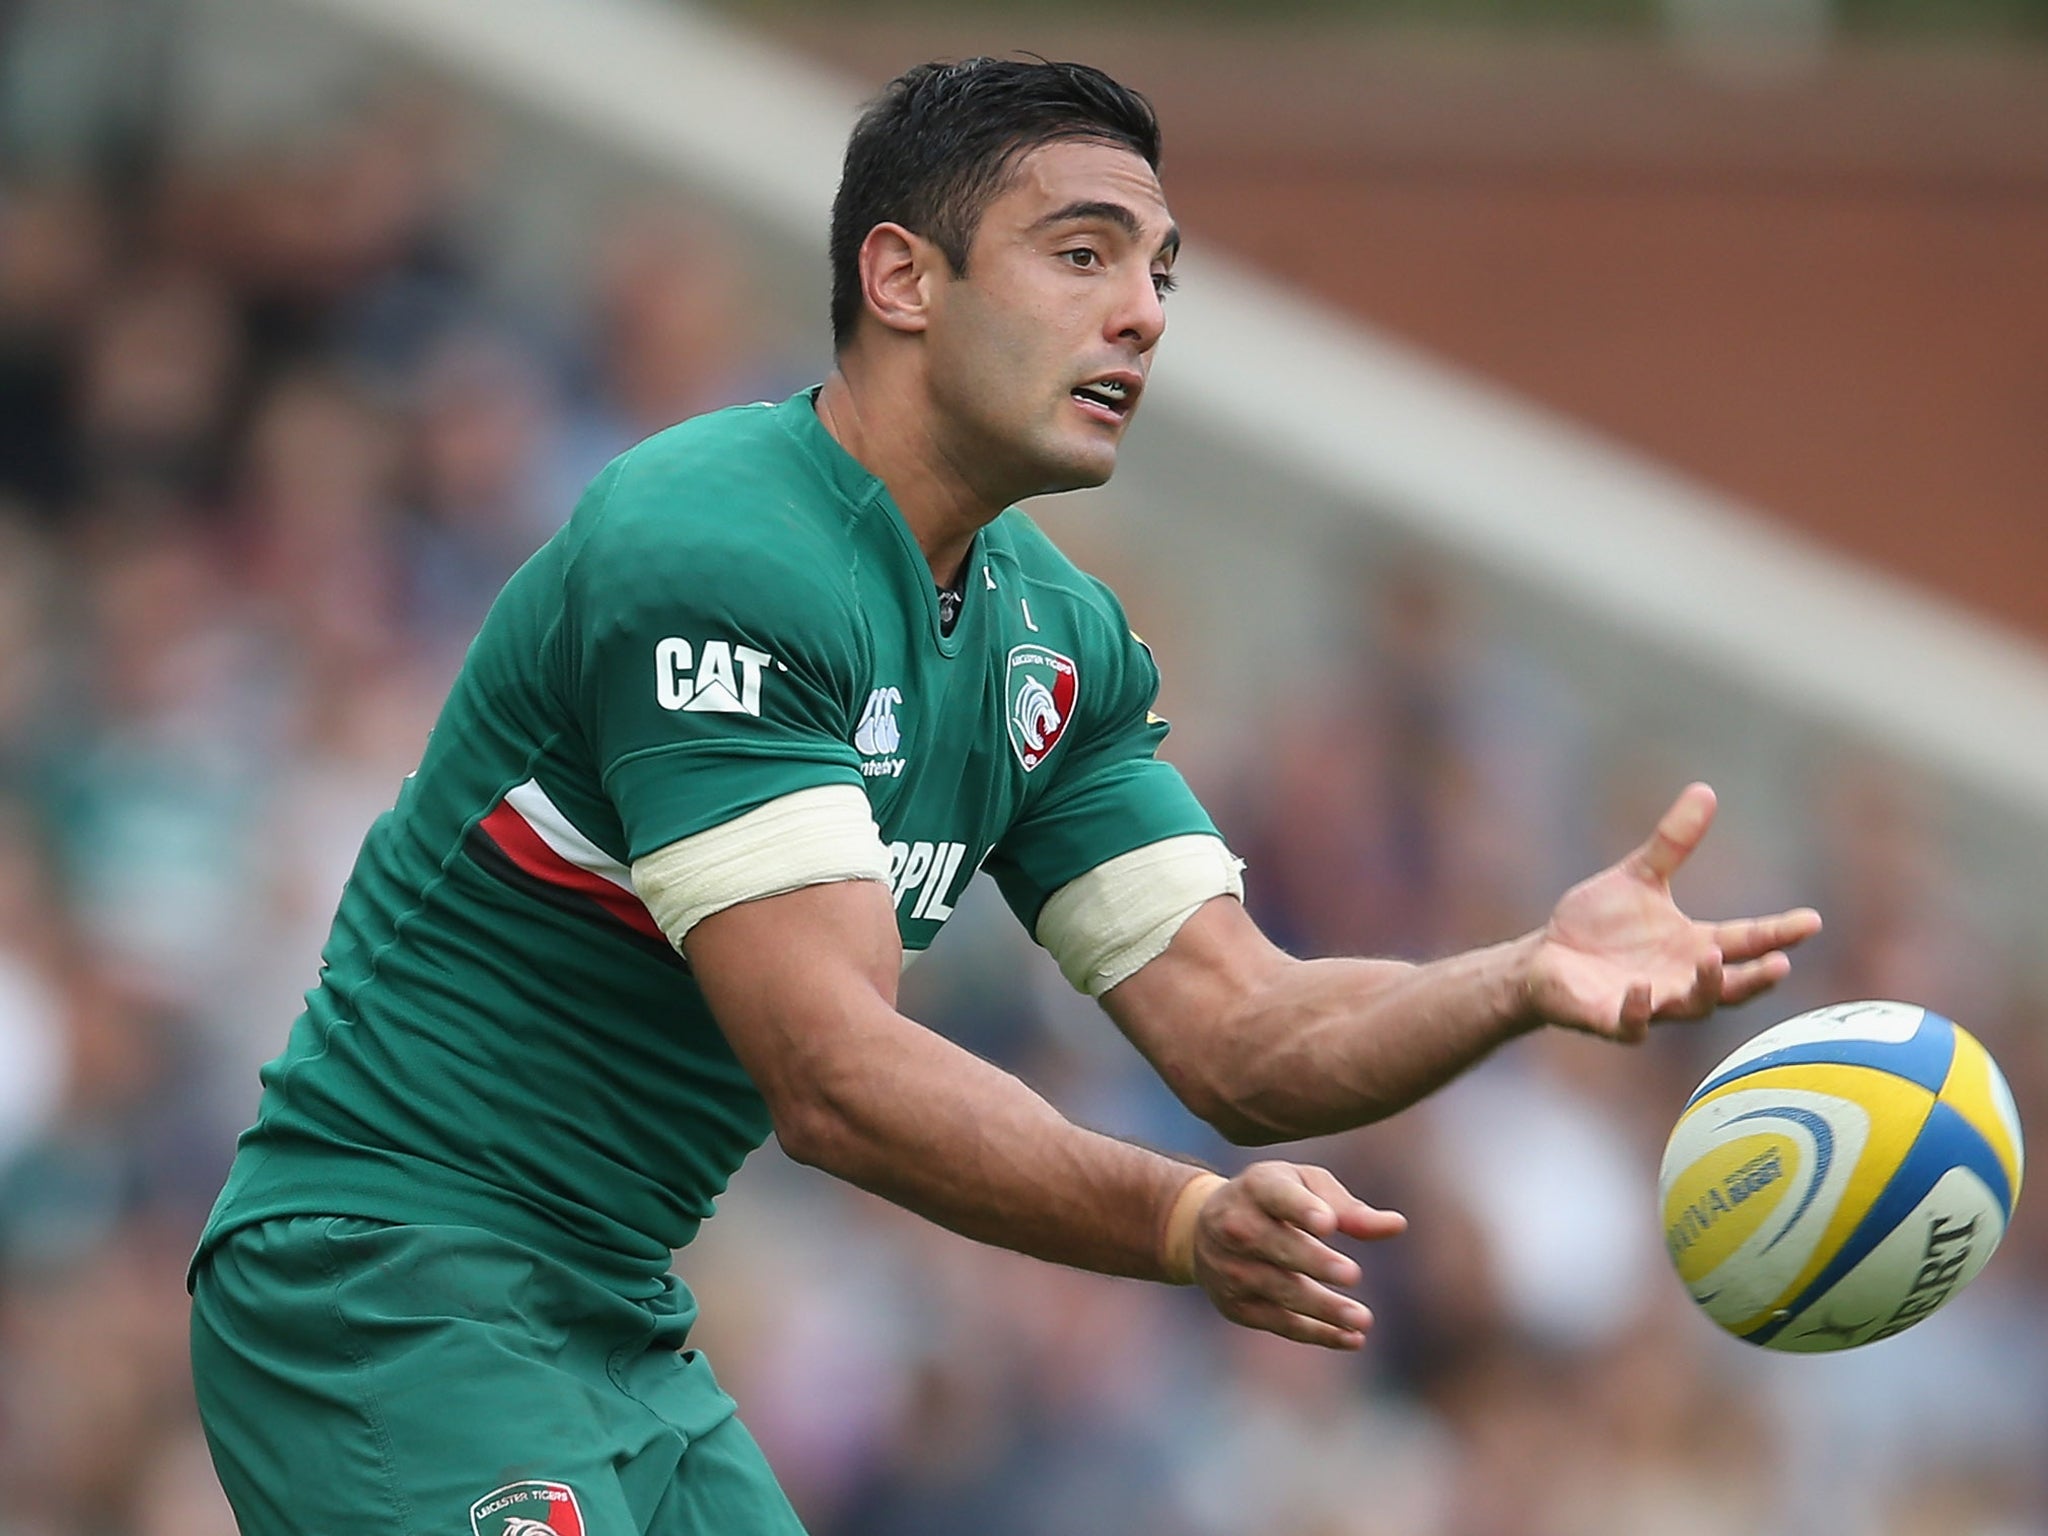 Leicester Tigers Dan Bowden could be playing for England after qualifying on residency rules